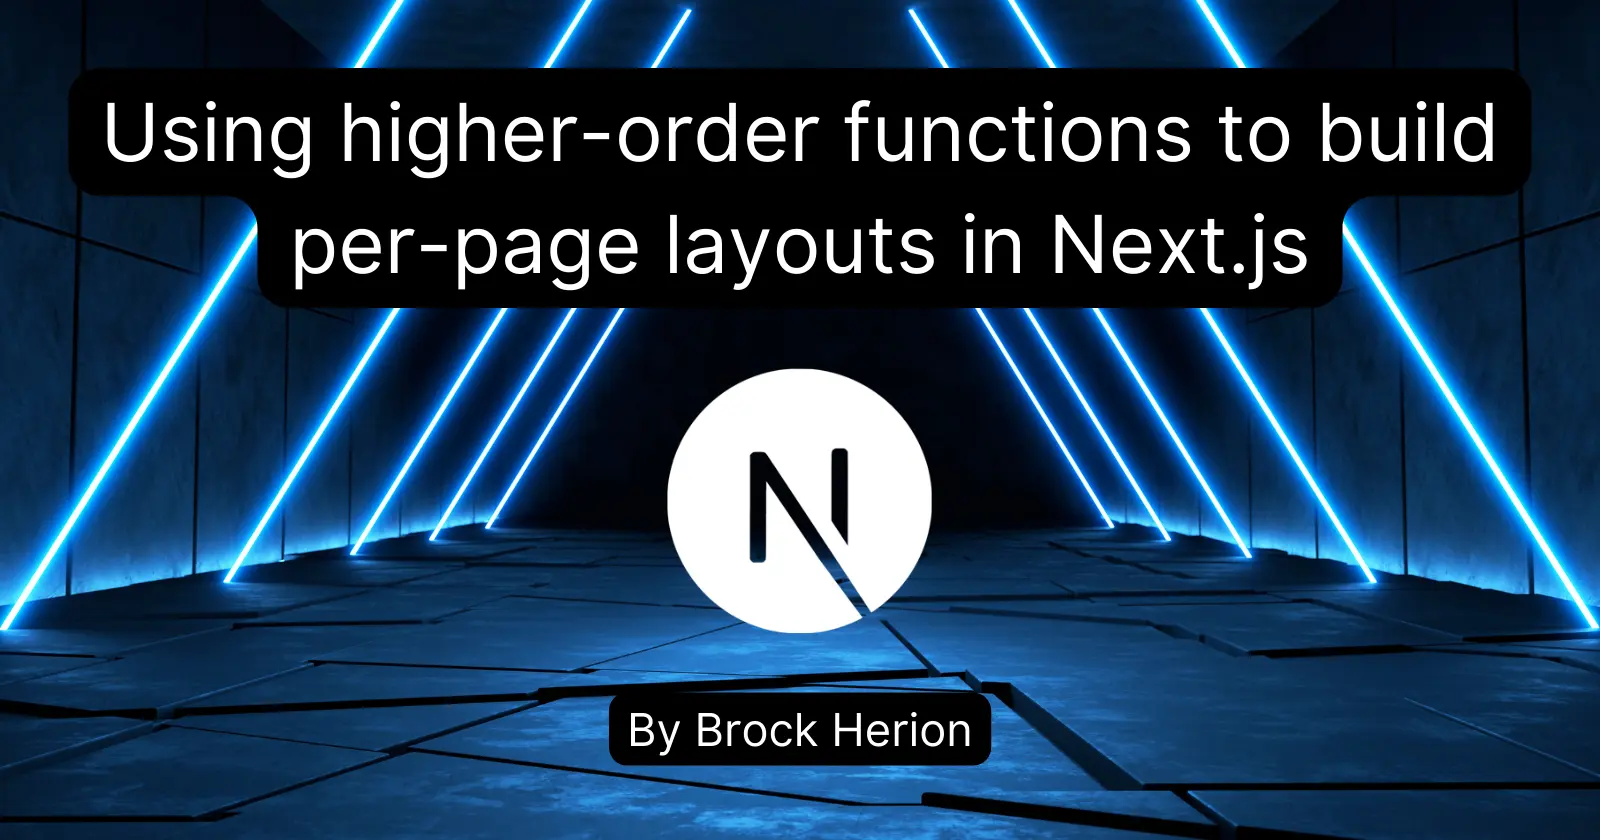 Using higher-order functions to build per-page layouts in Next.js